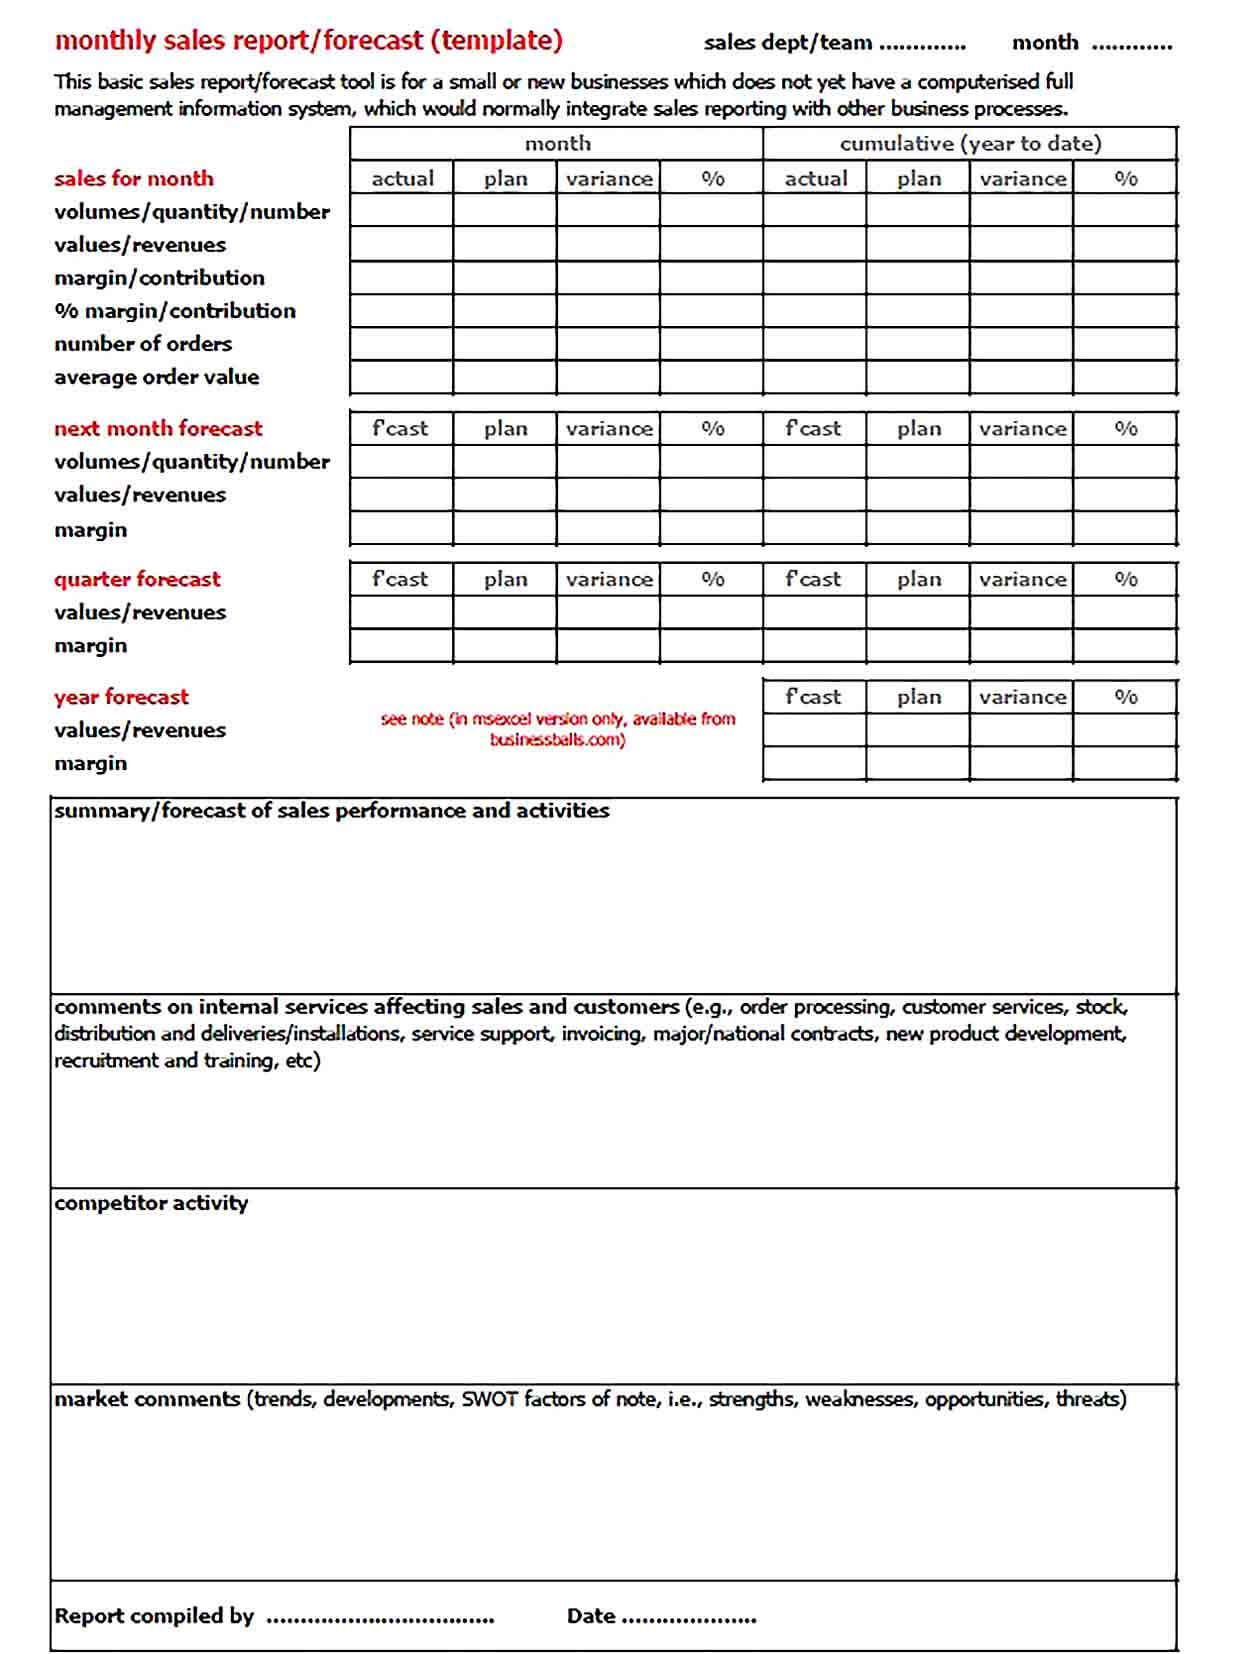 Sample monthly sales report template1